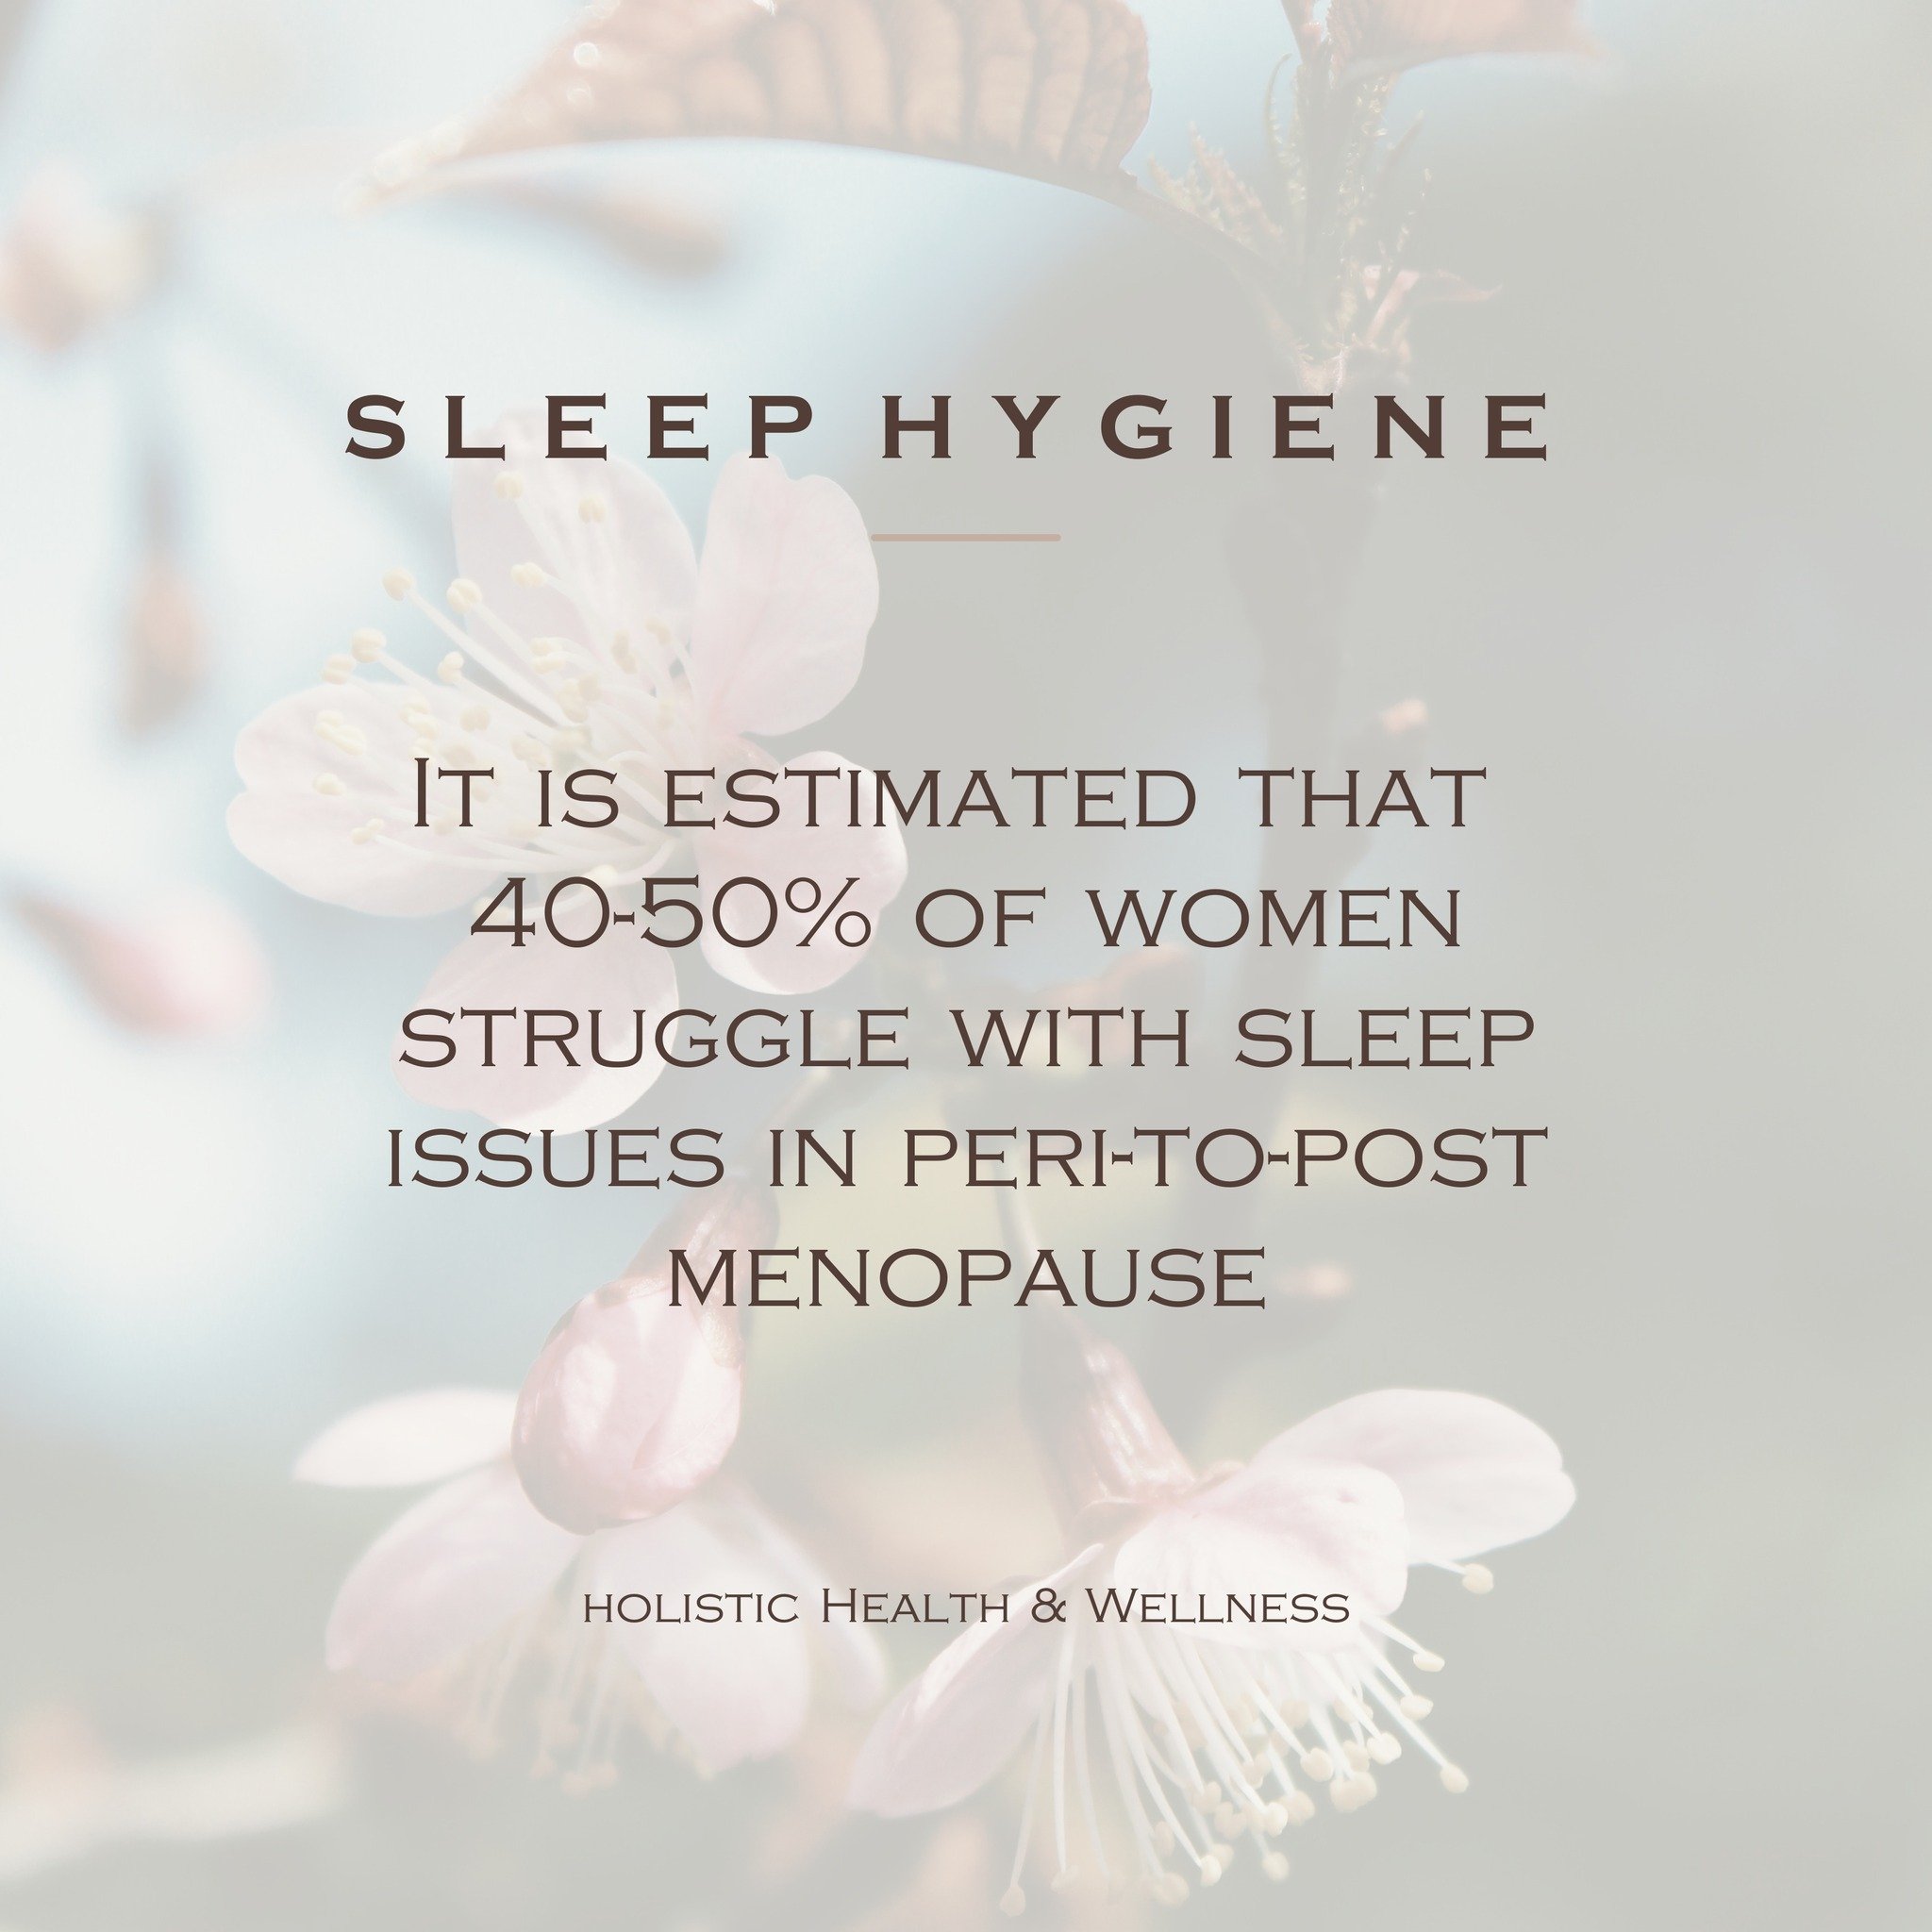 S L E E P H Y G I E N E ⁣
⁣
It is estimated that 40-50% of women struggle with sleep issues in the peri-to-post menopause stages of life. Common sleep issues include hot flashes and insomnia, breathing disorders and anxiety also scoring high. ⁣
⁣
Sle